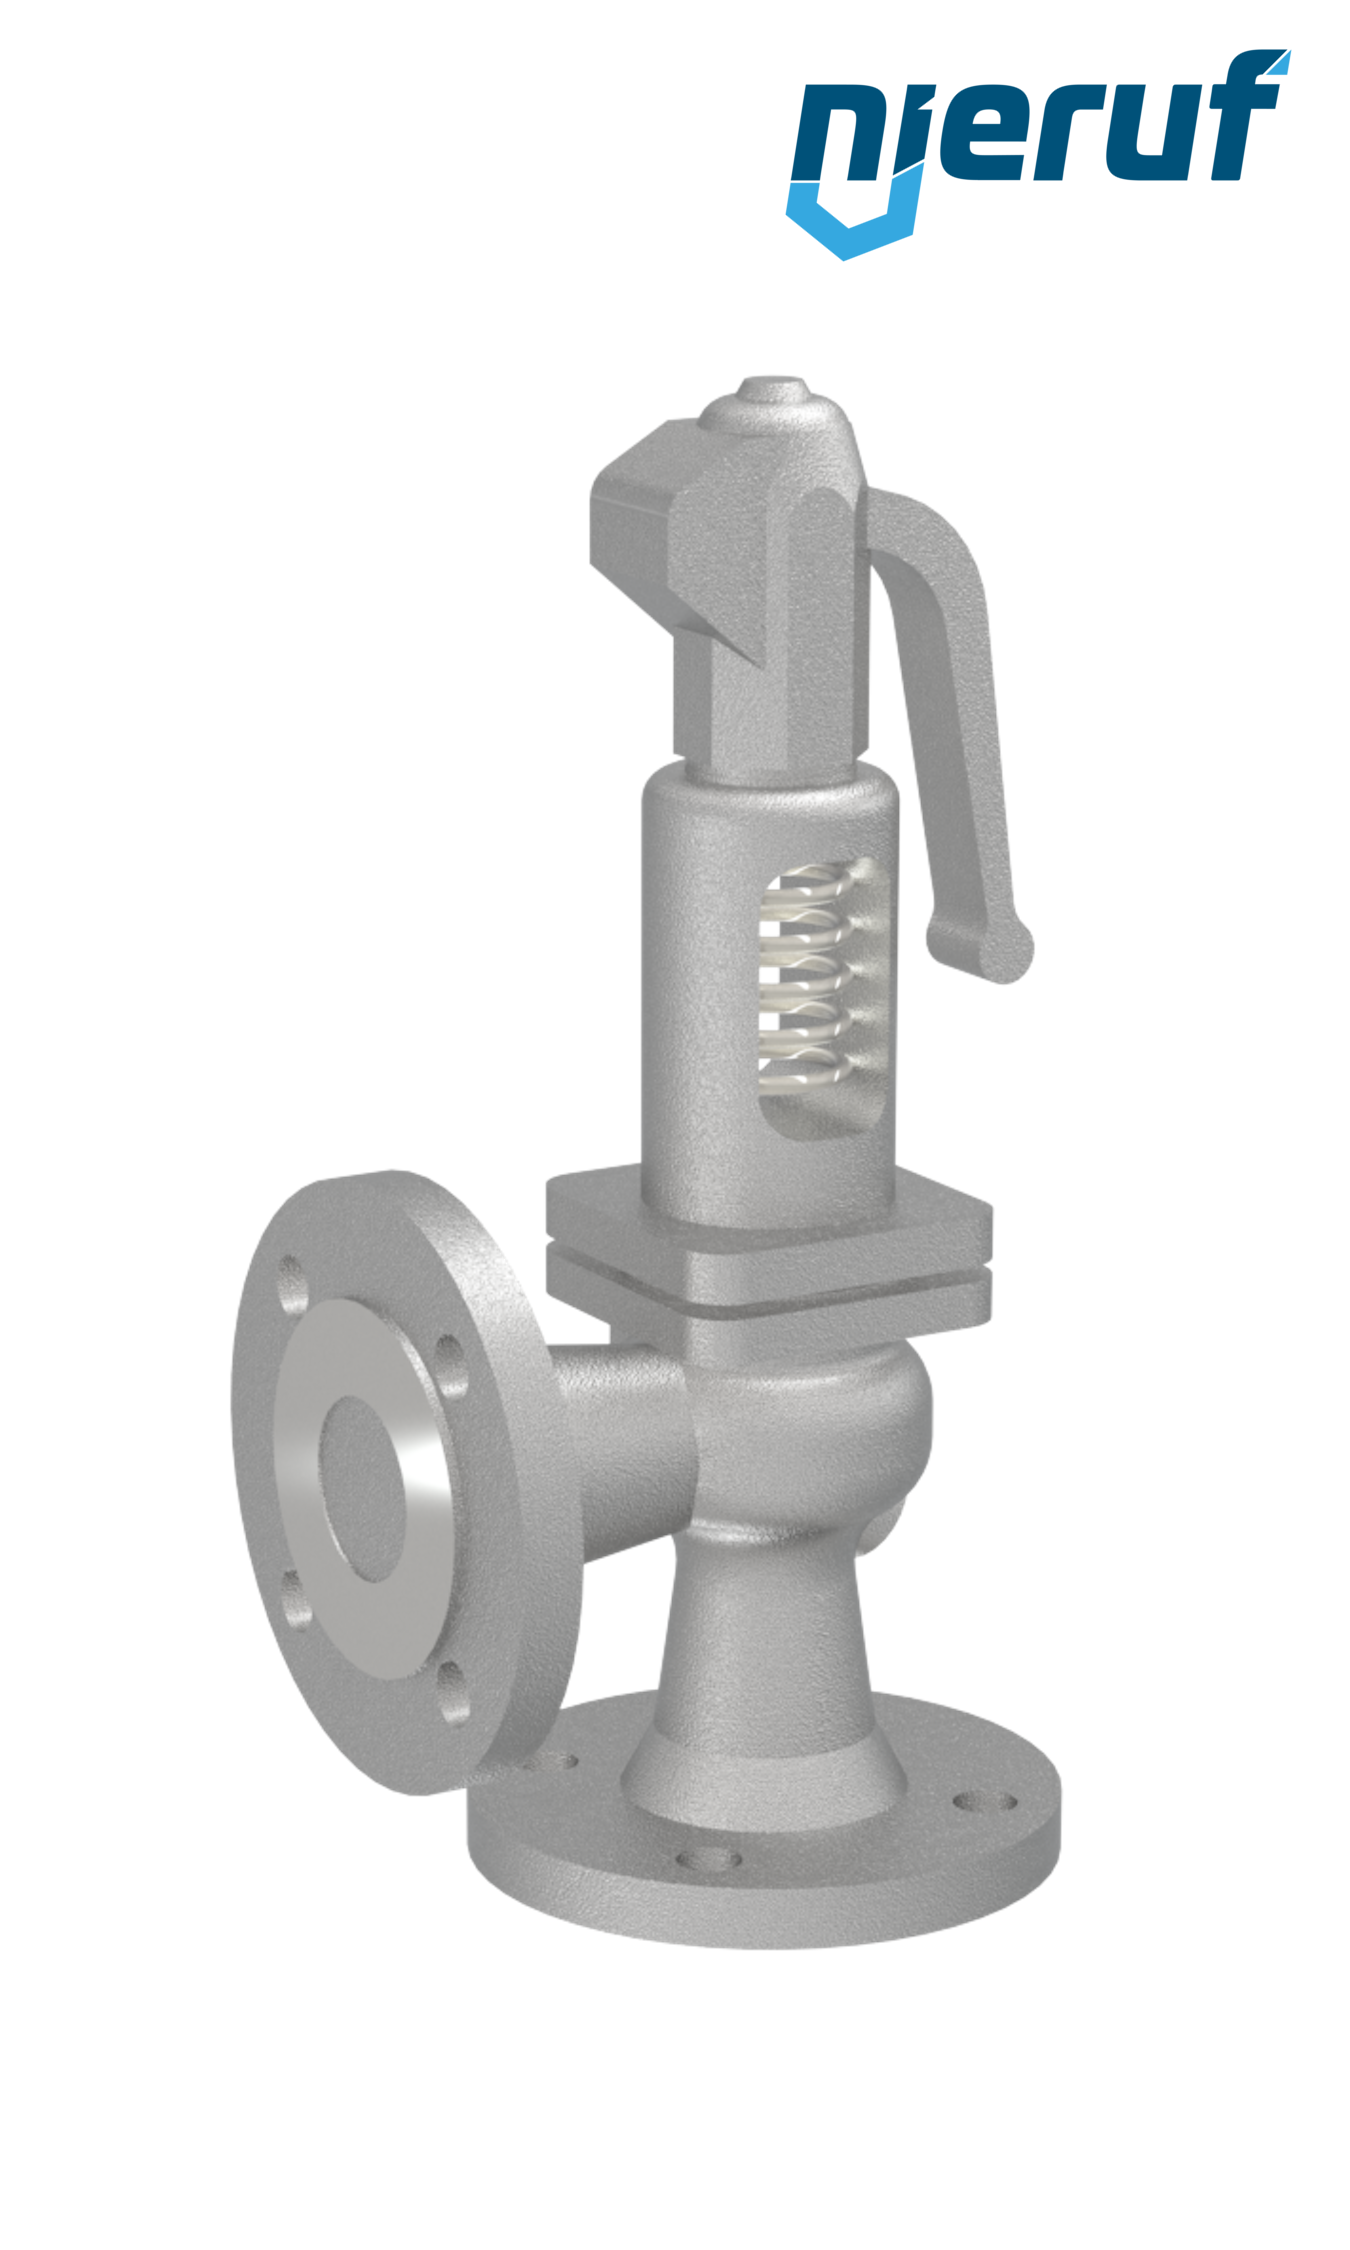 flange-safety valve DN15/DN15 SF0202, cast steel FPM, with lever